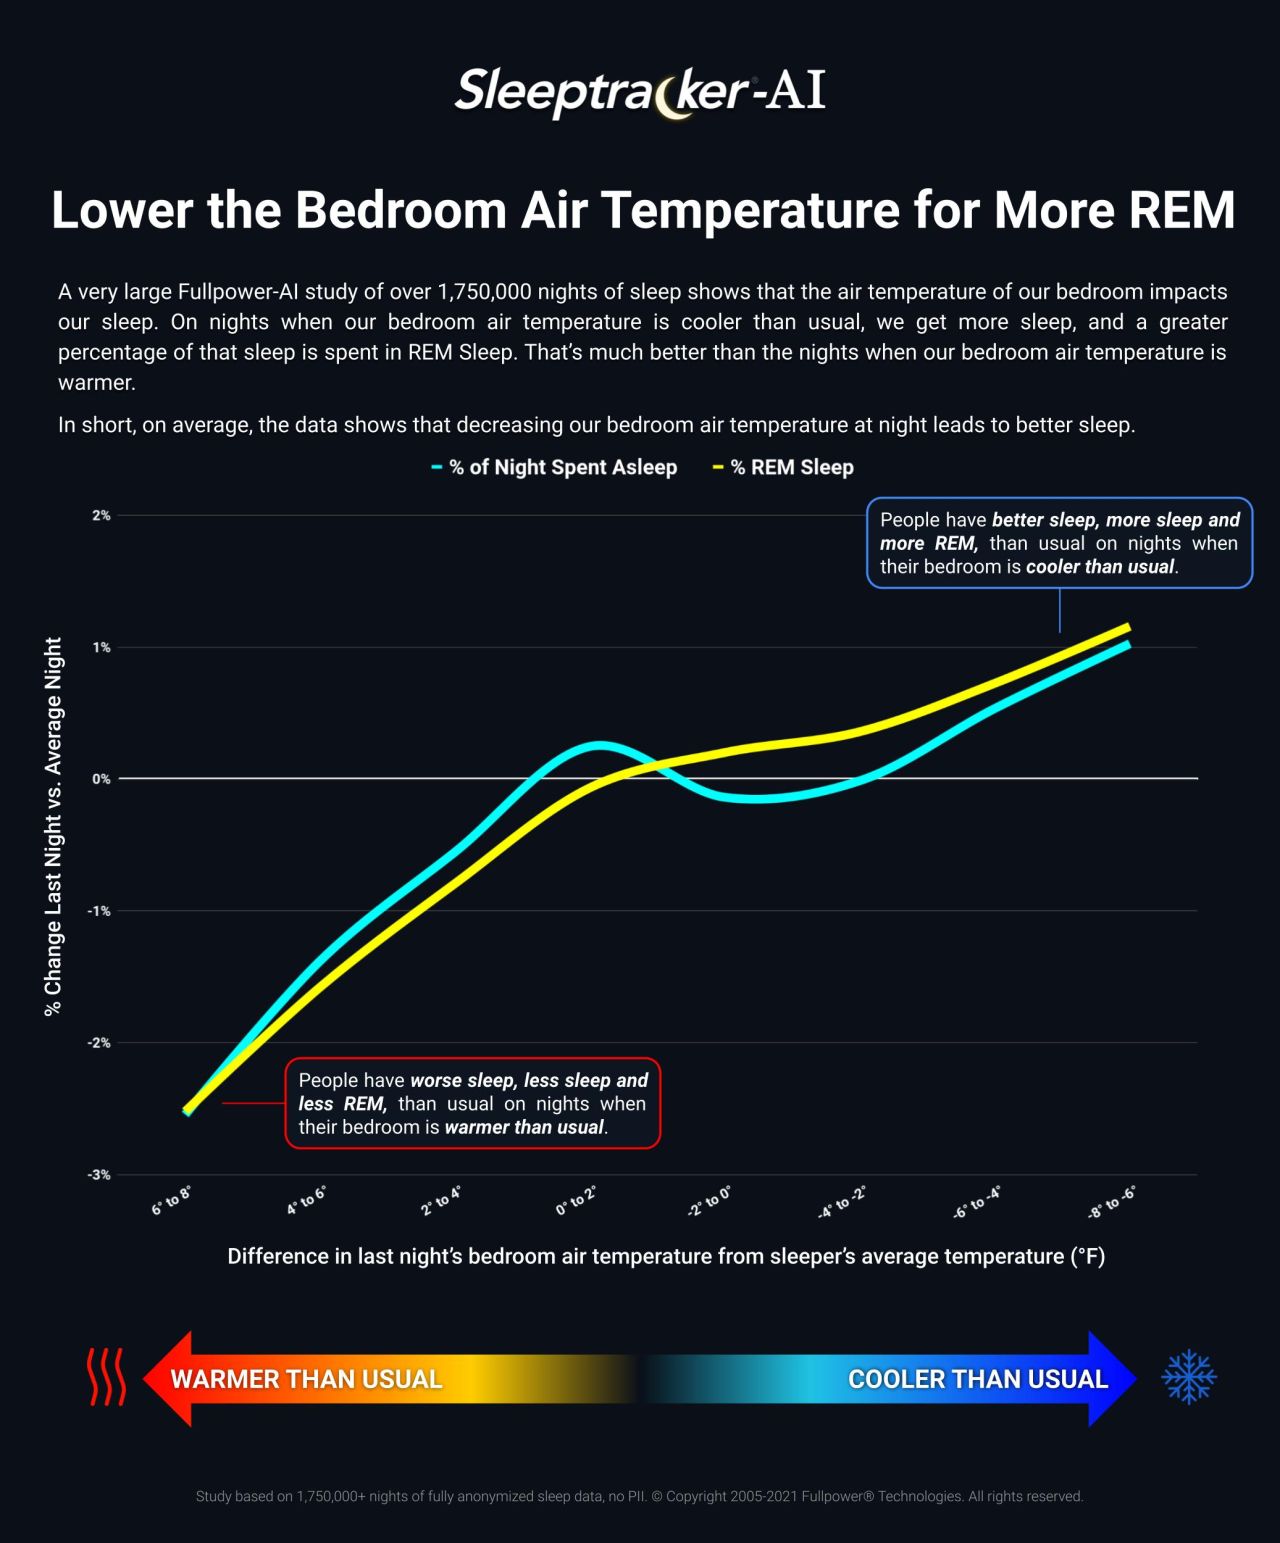 Lower the Bedroom Air Temperature for More REM